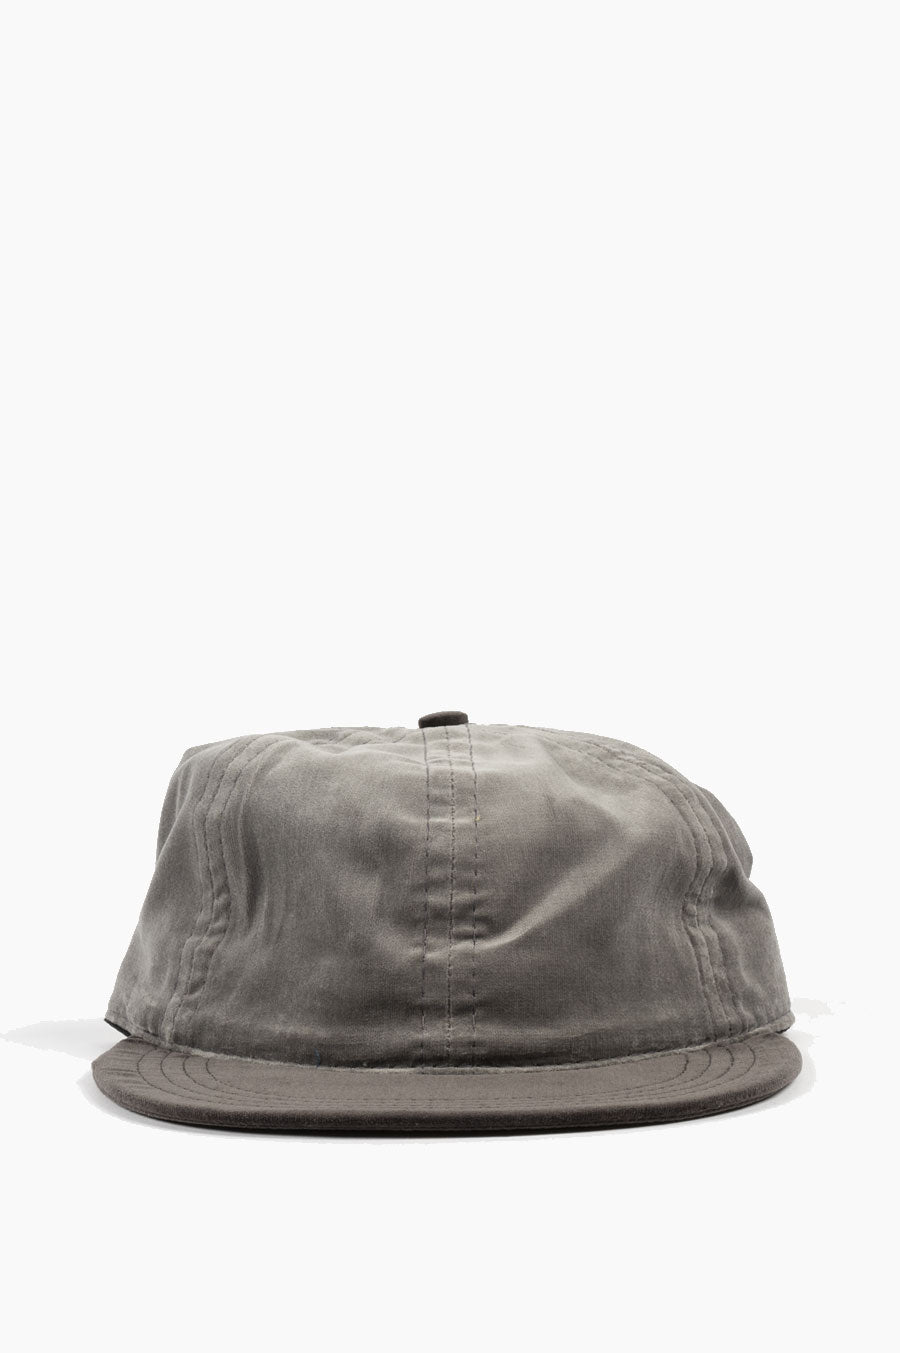 HOUSE OF PAA FLOPPY BALL CAP GREY CHARCOAL